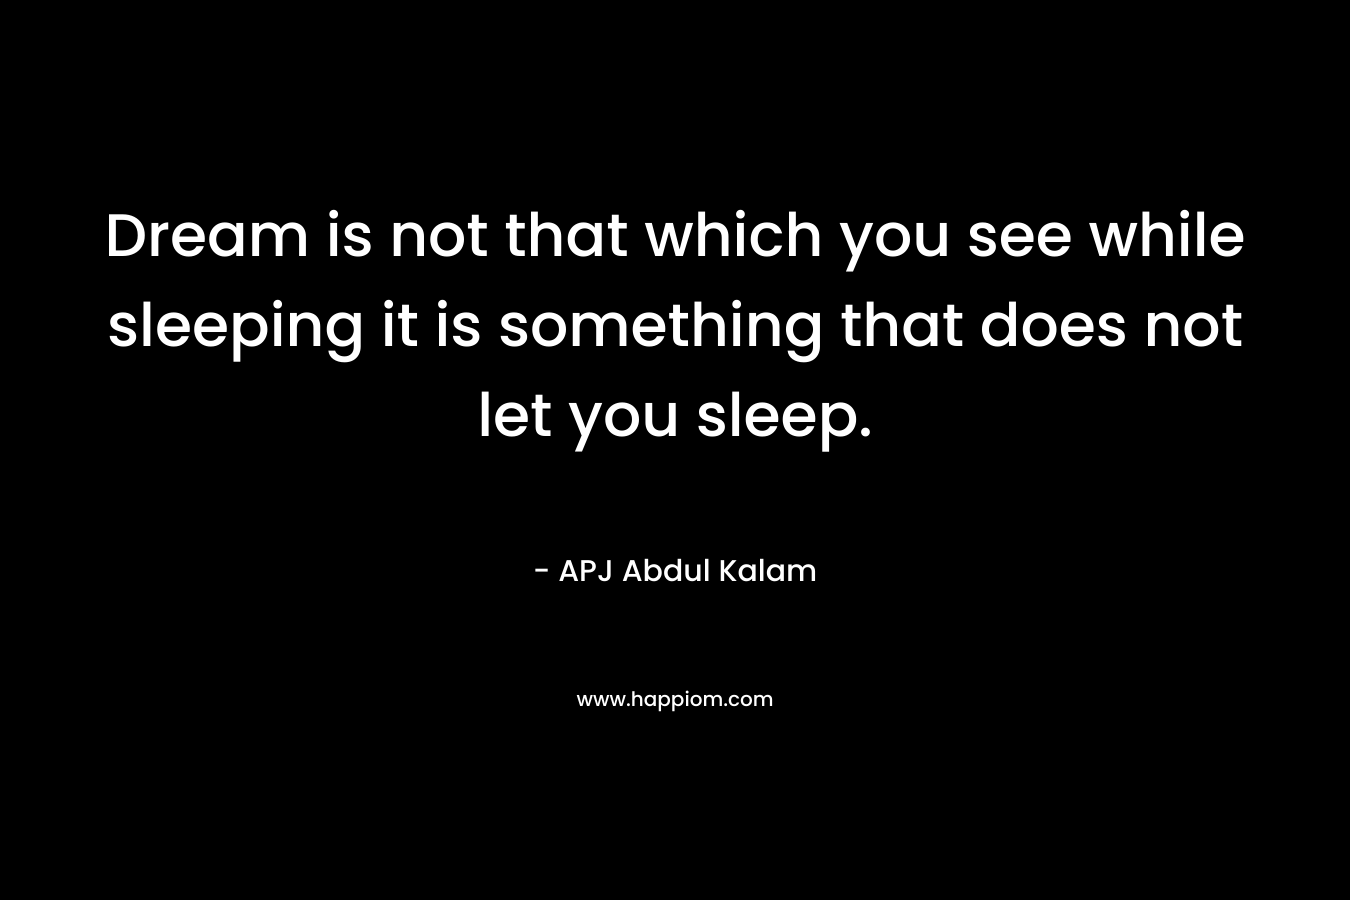 Dream is not that which you see while sleeping it is something that does not let you sleep. – APJ Abdul Kalam